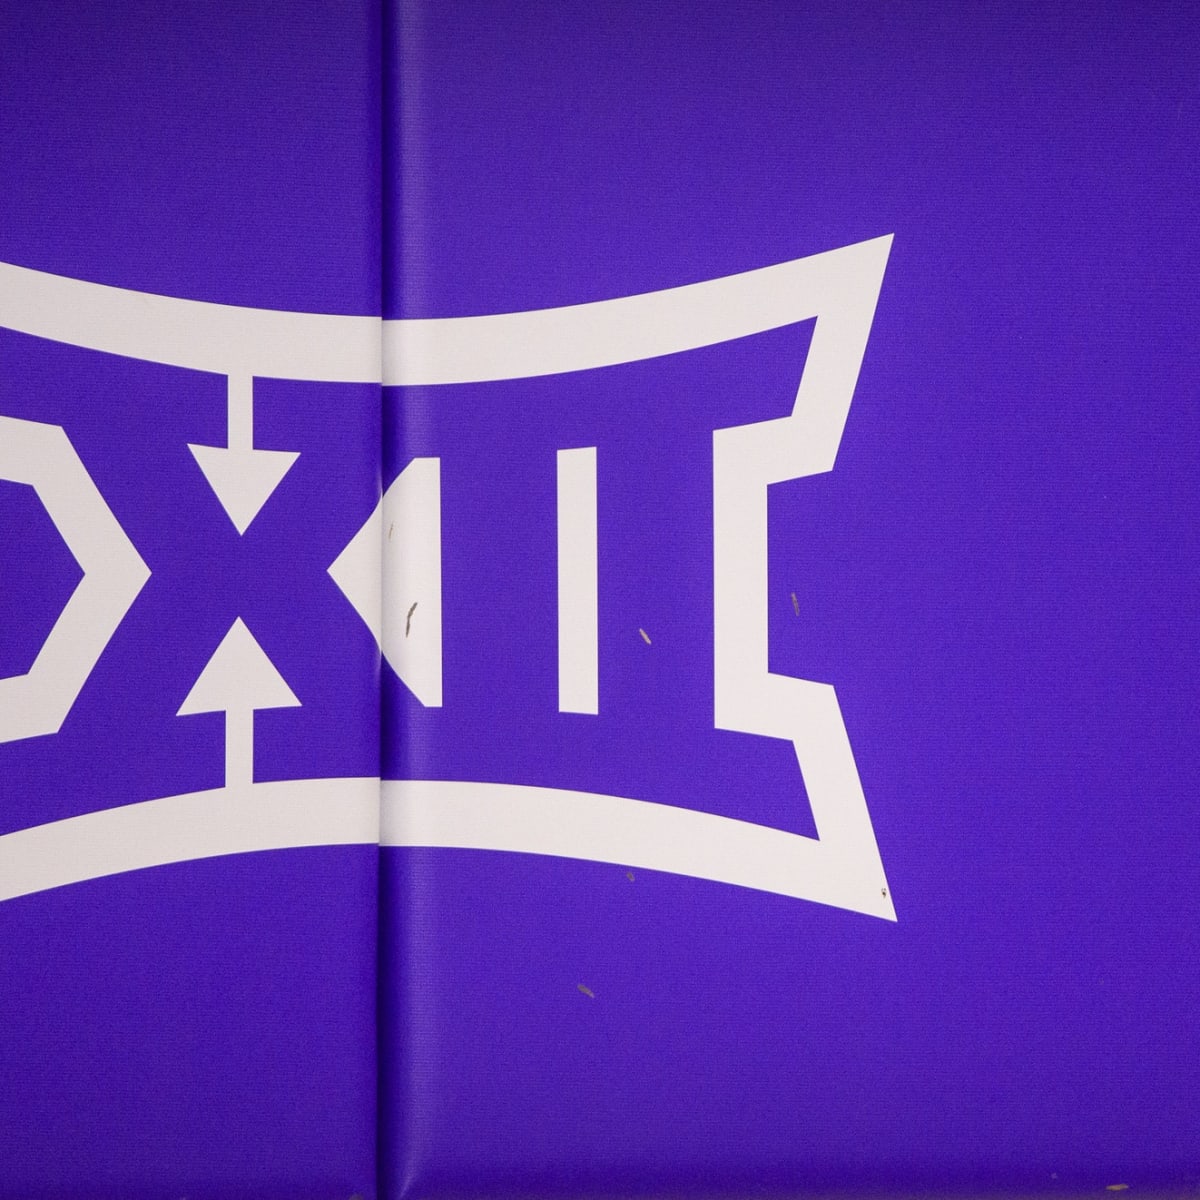 RE: Another friendly reminder: We're joining the Big 12. Not the Big XII.